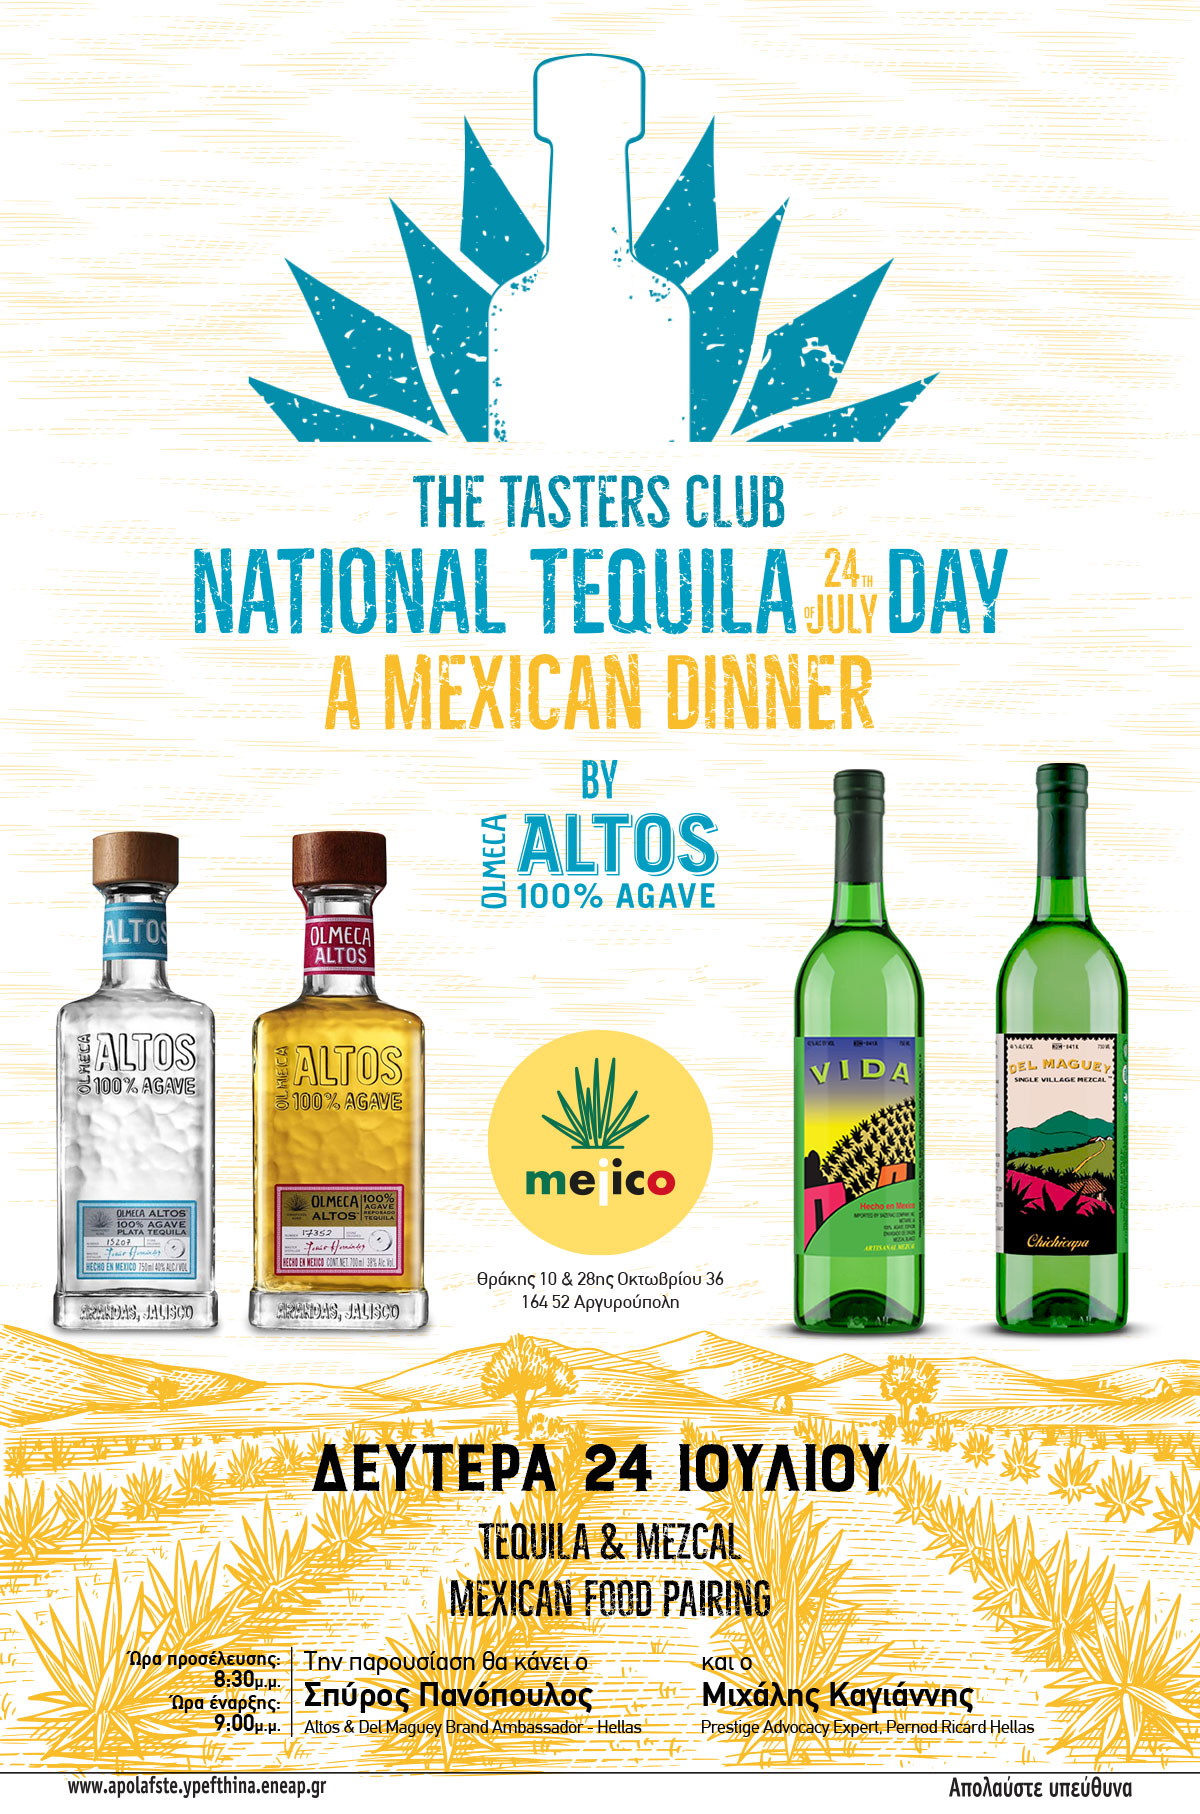 The Tasters Club National Tequila Day A Mexican dinner by Altos tequila